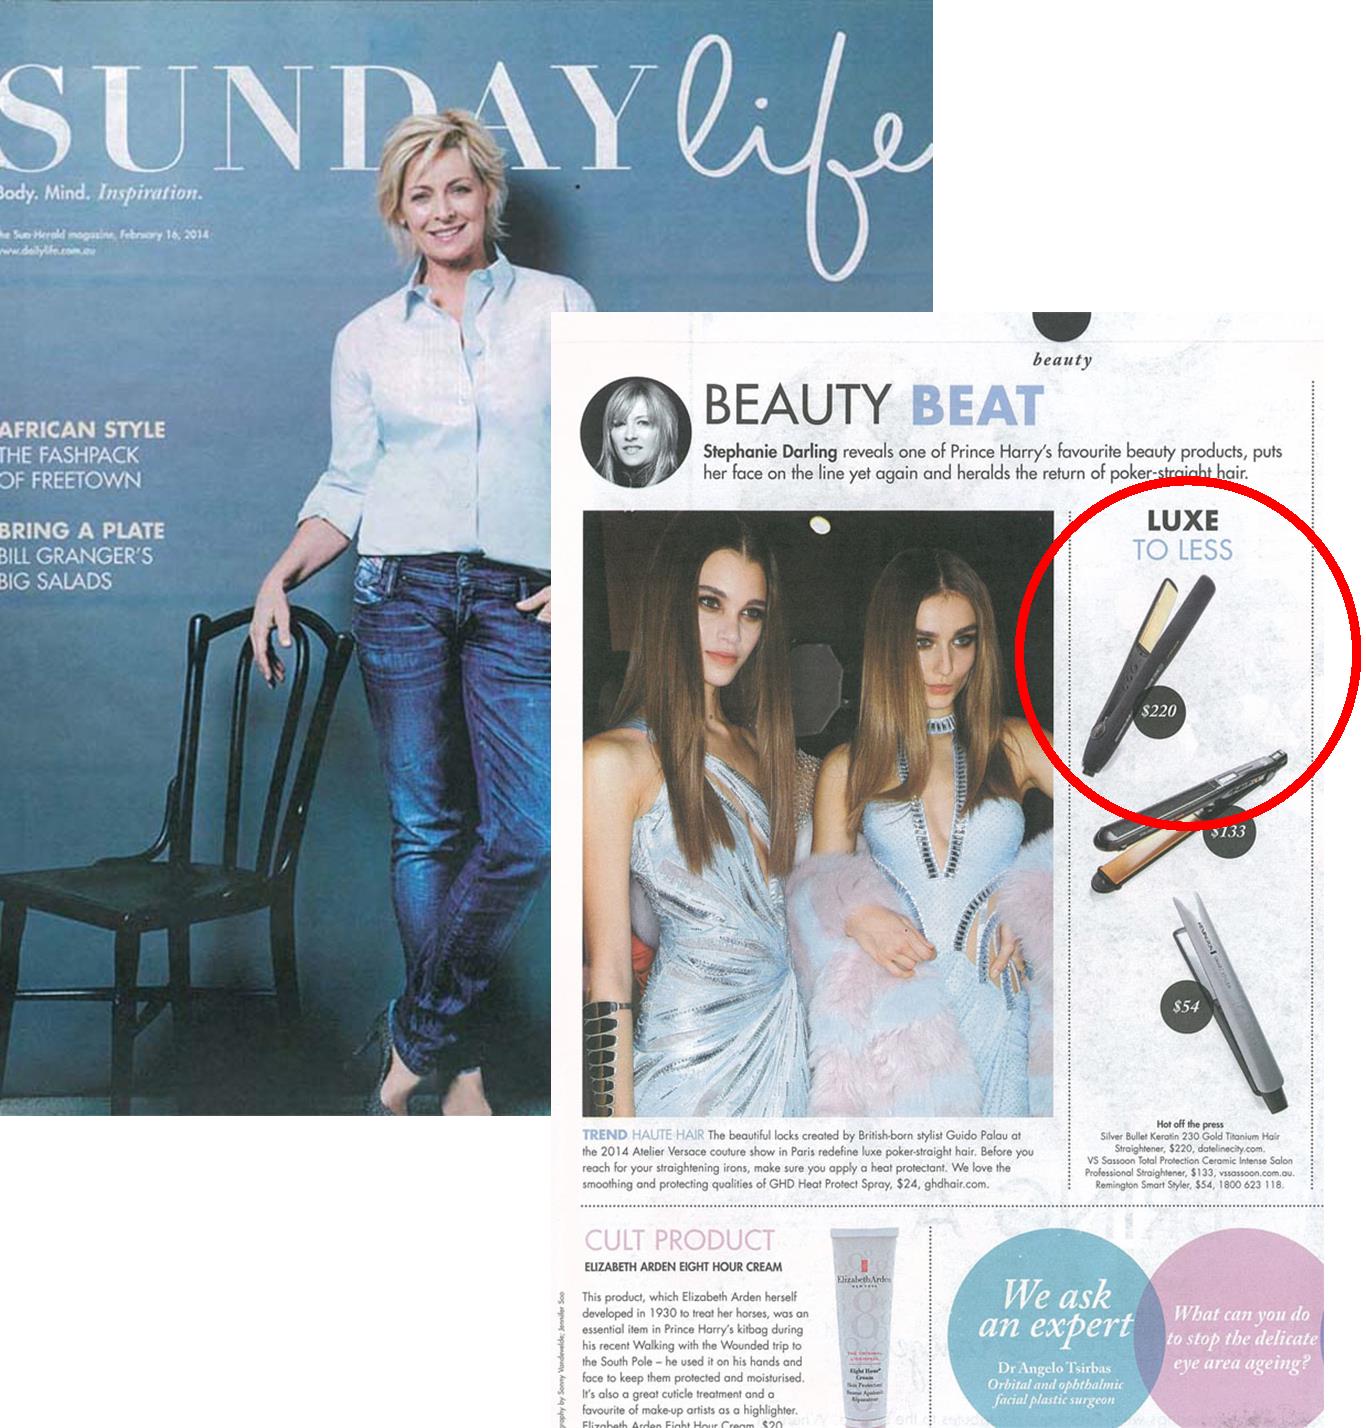 Silver Bullet seen in Sunday Life Magazine